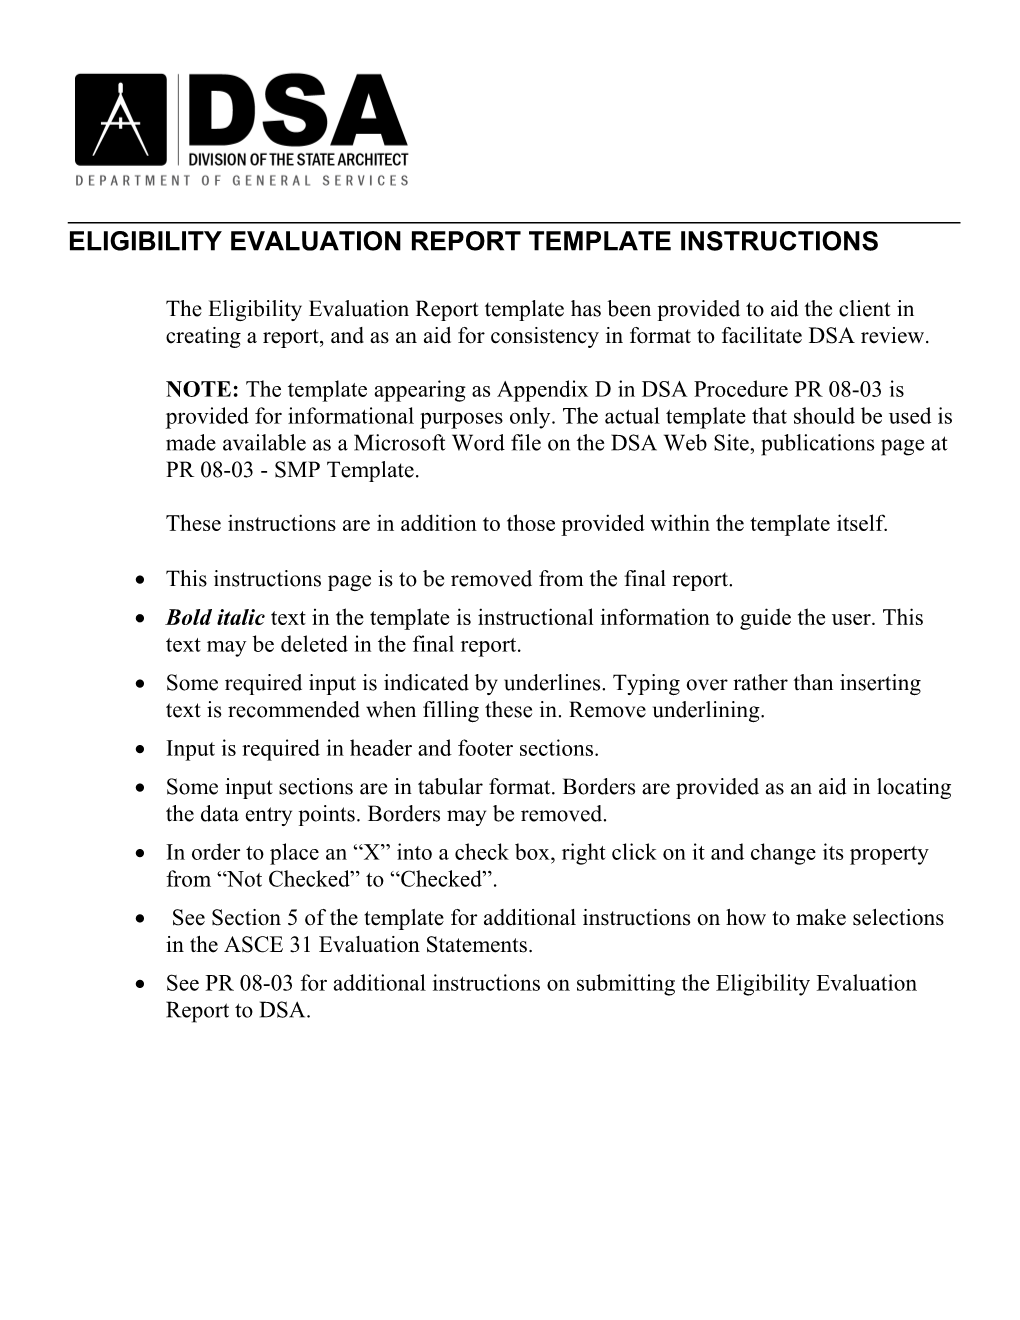 Eligibility Evaluation Report Template and Instructions